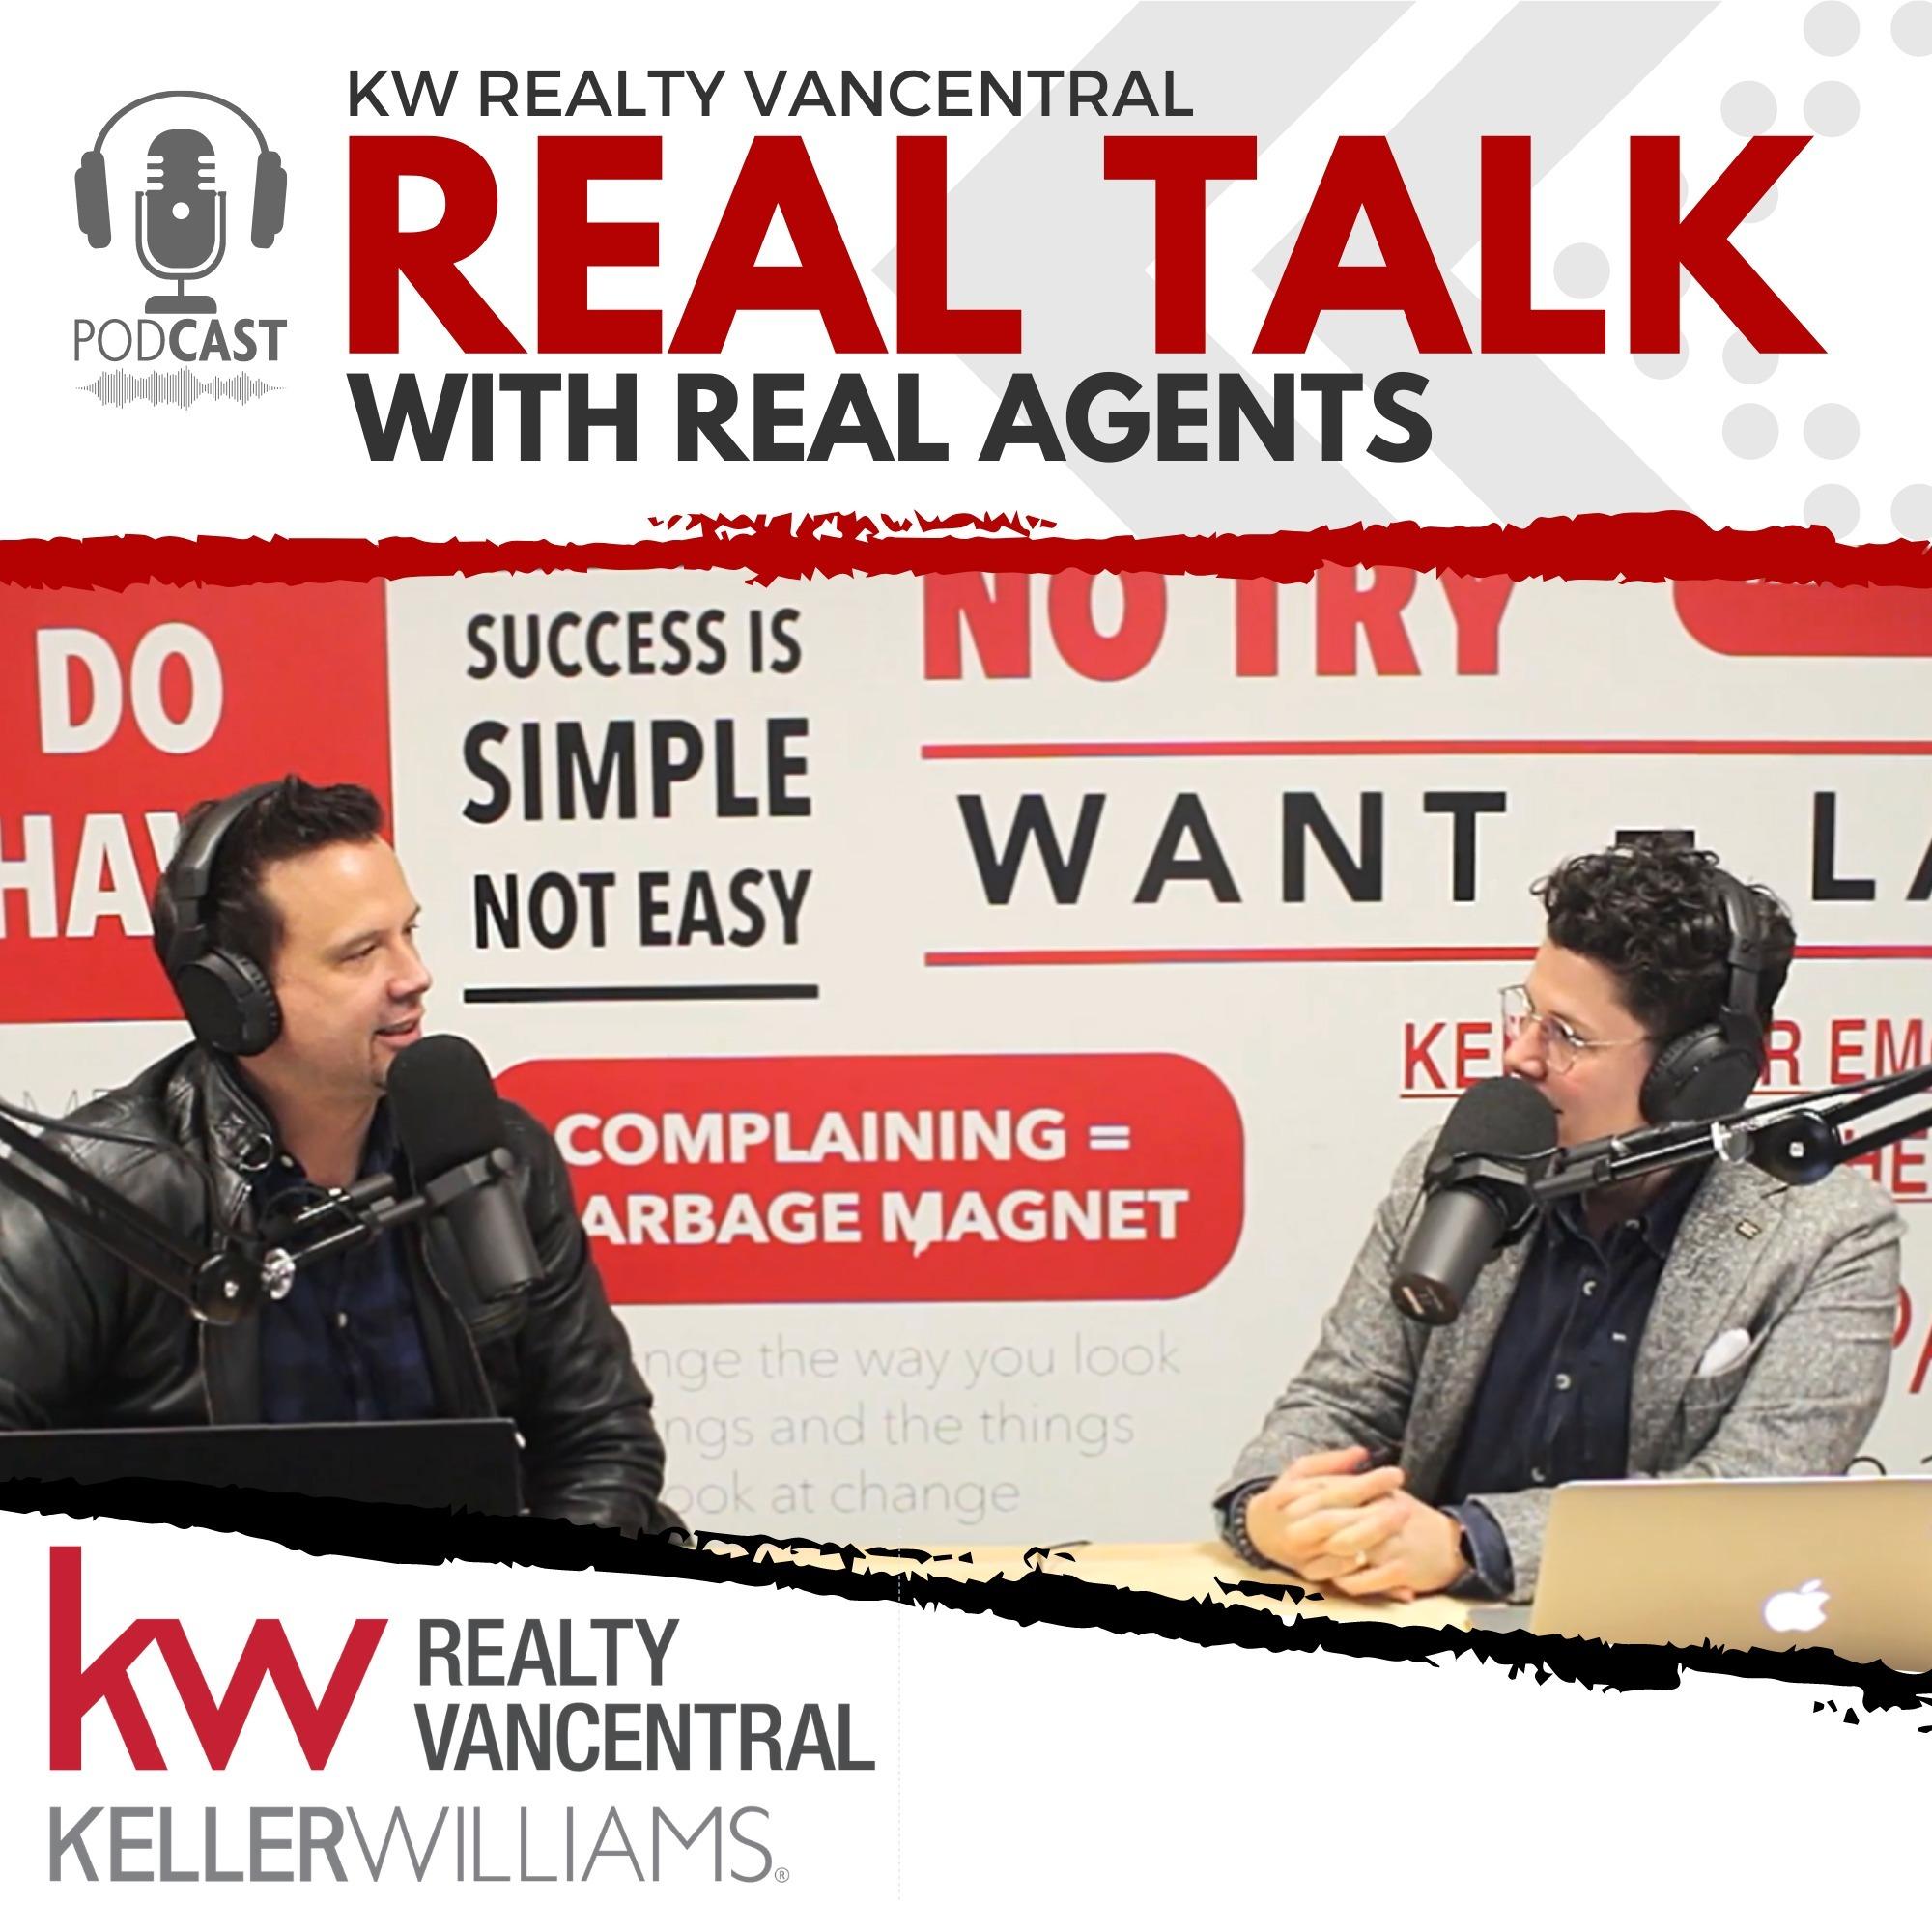 KW Realty Vancentral Podcast